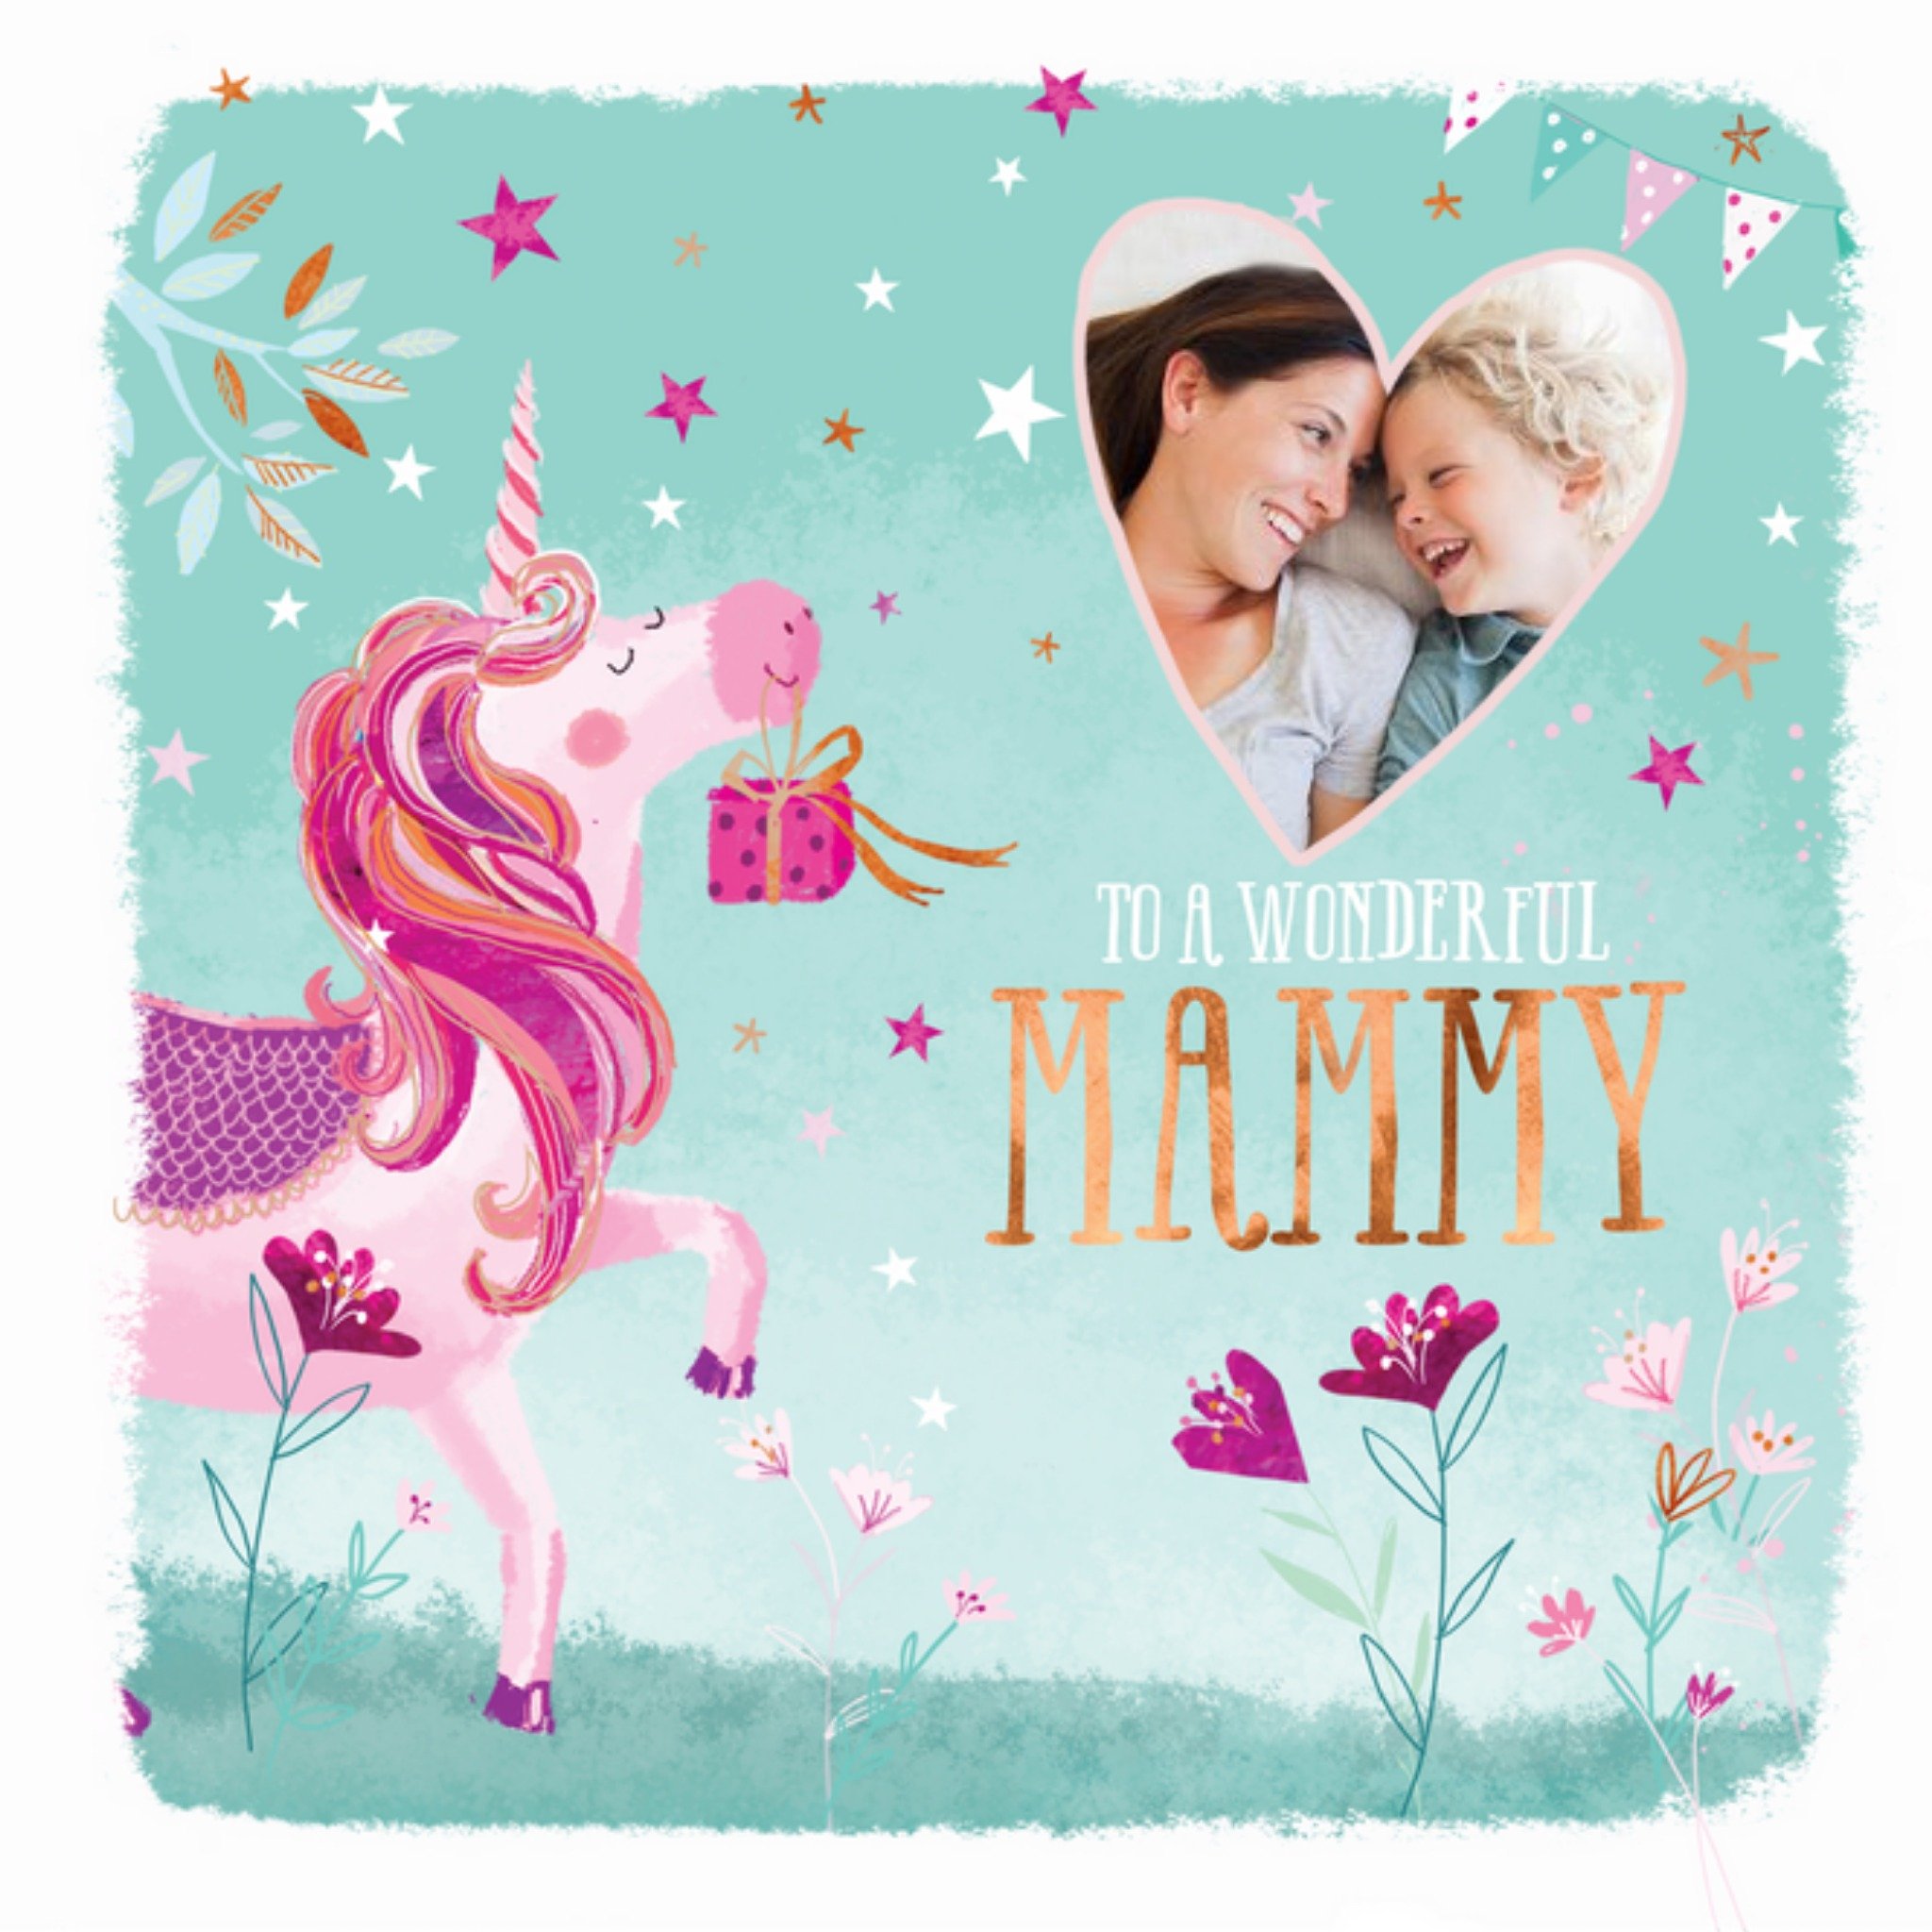 Ling Design Unicorn To A Wonderful Mammy Photo Mother's Day Card, Large